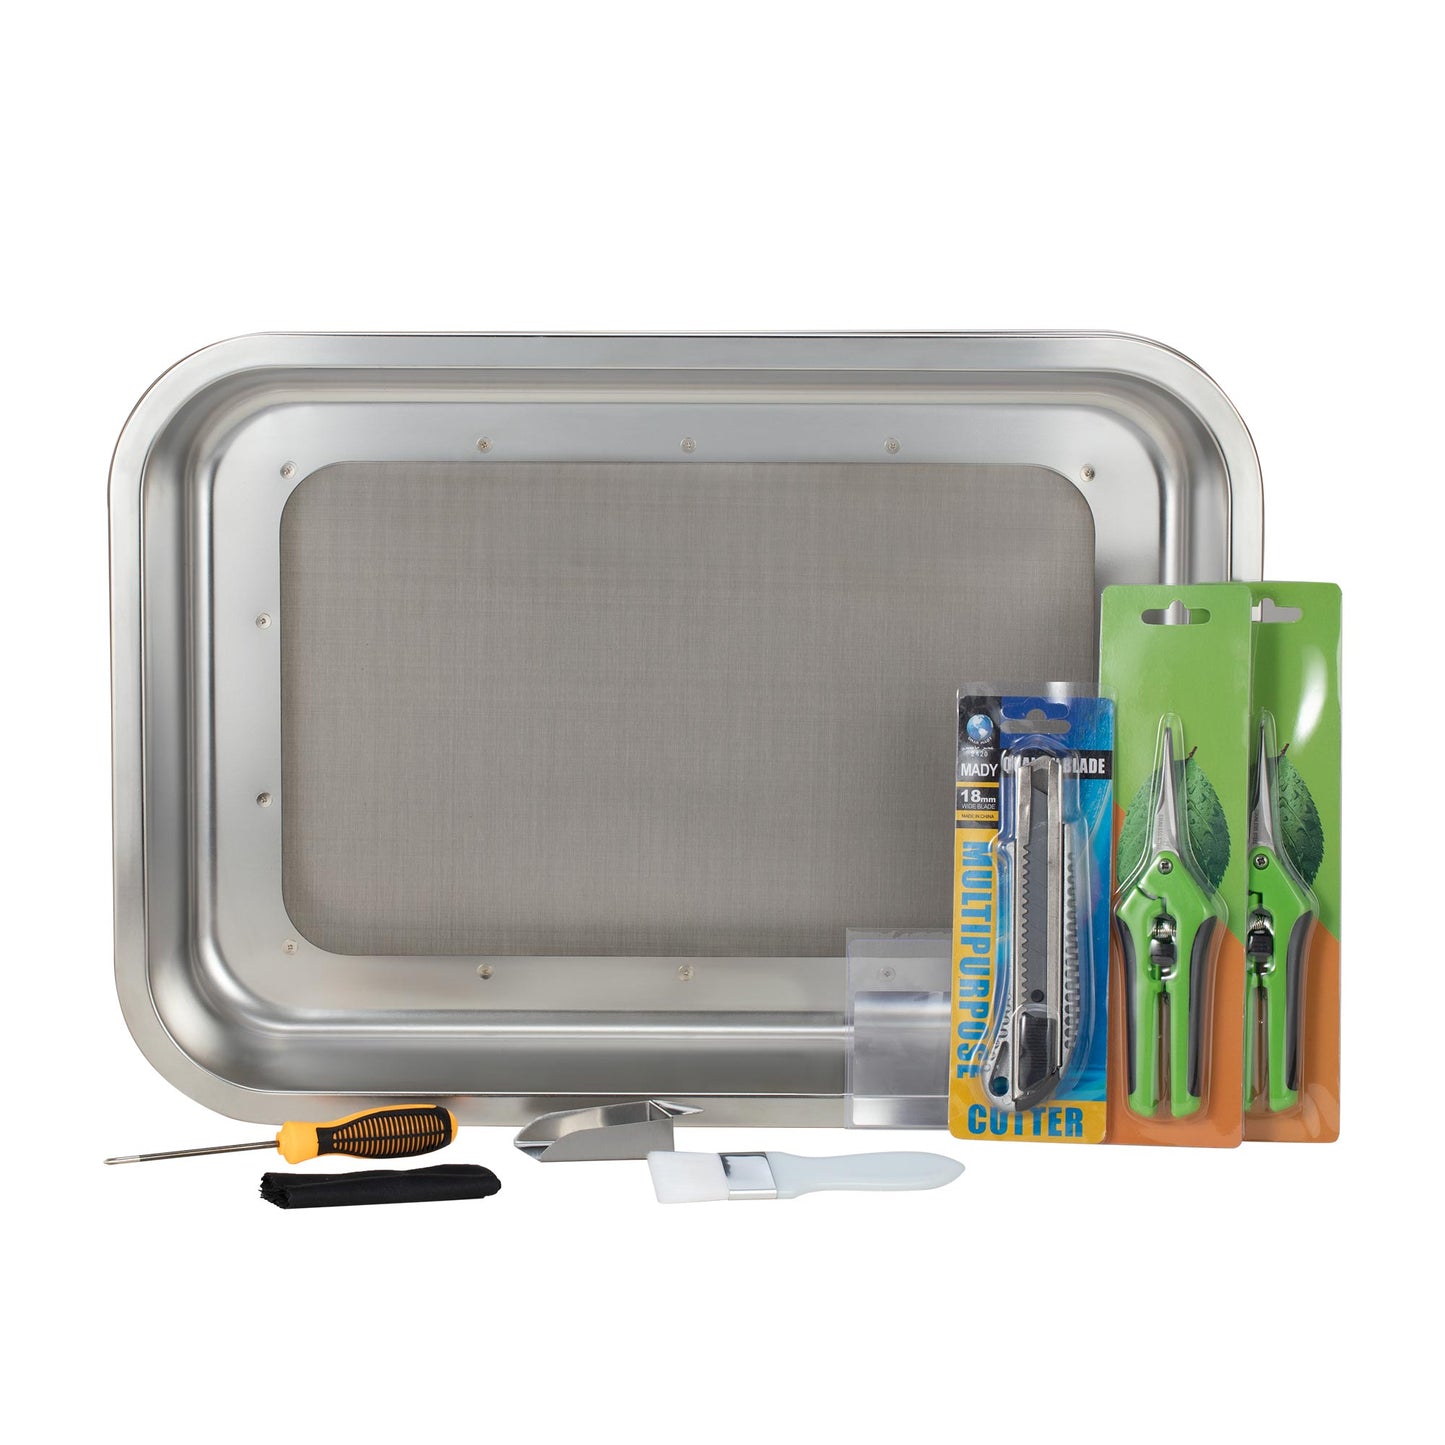 mogobe trim tray with 2 trimming scissors, 1 brush, 1 Pollen collection shovel, 1 magnifying glass card, 1 special screwdriver, 1 utility knife, and 1 cleaning cloth.